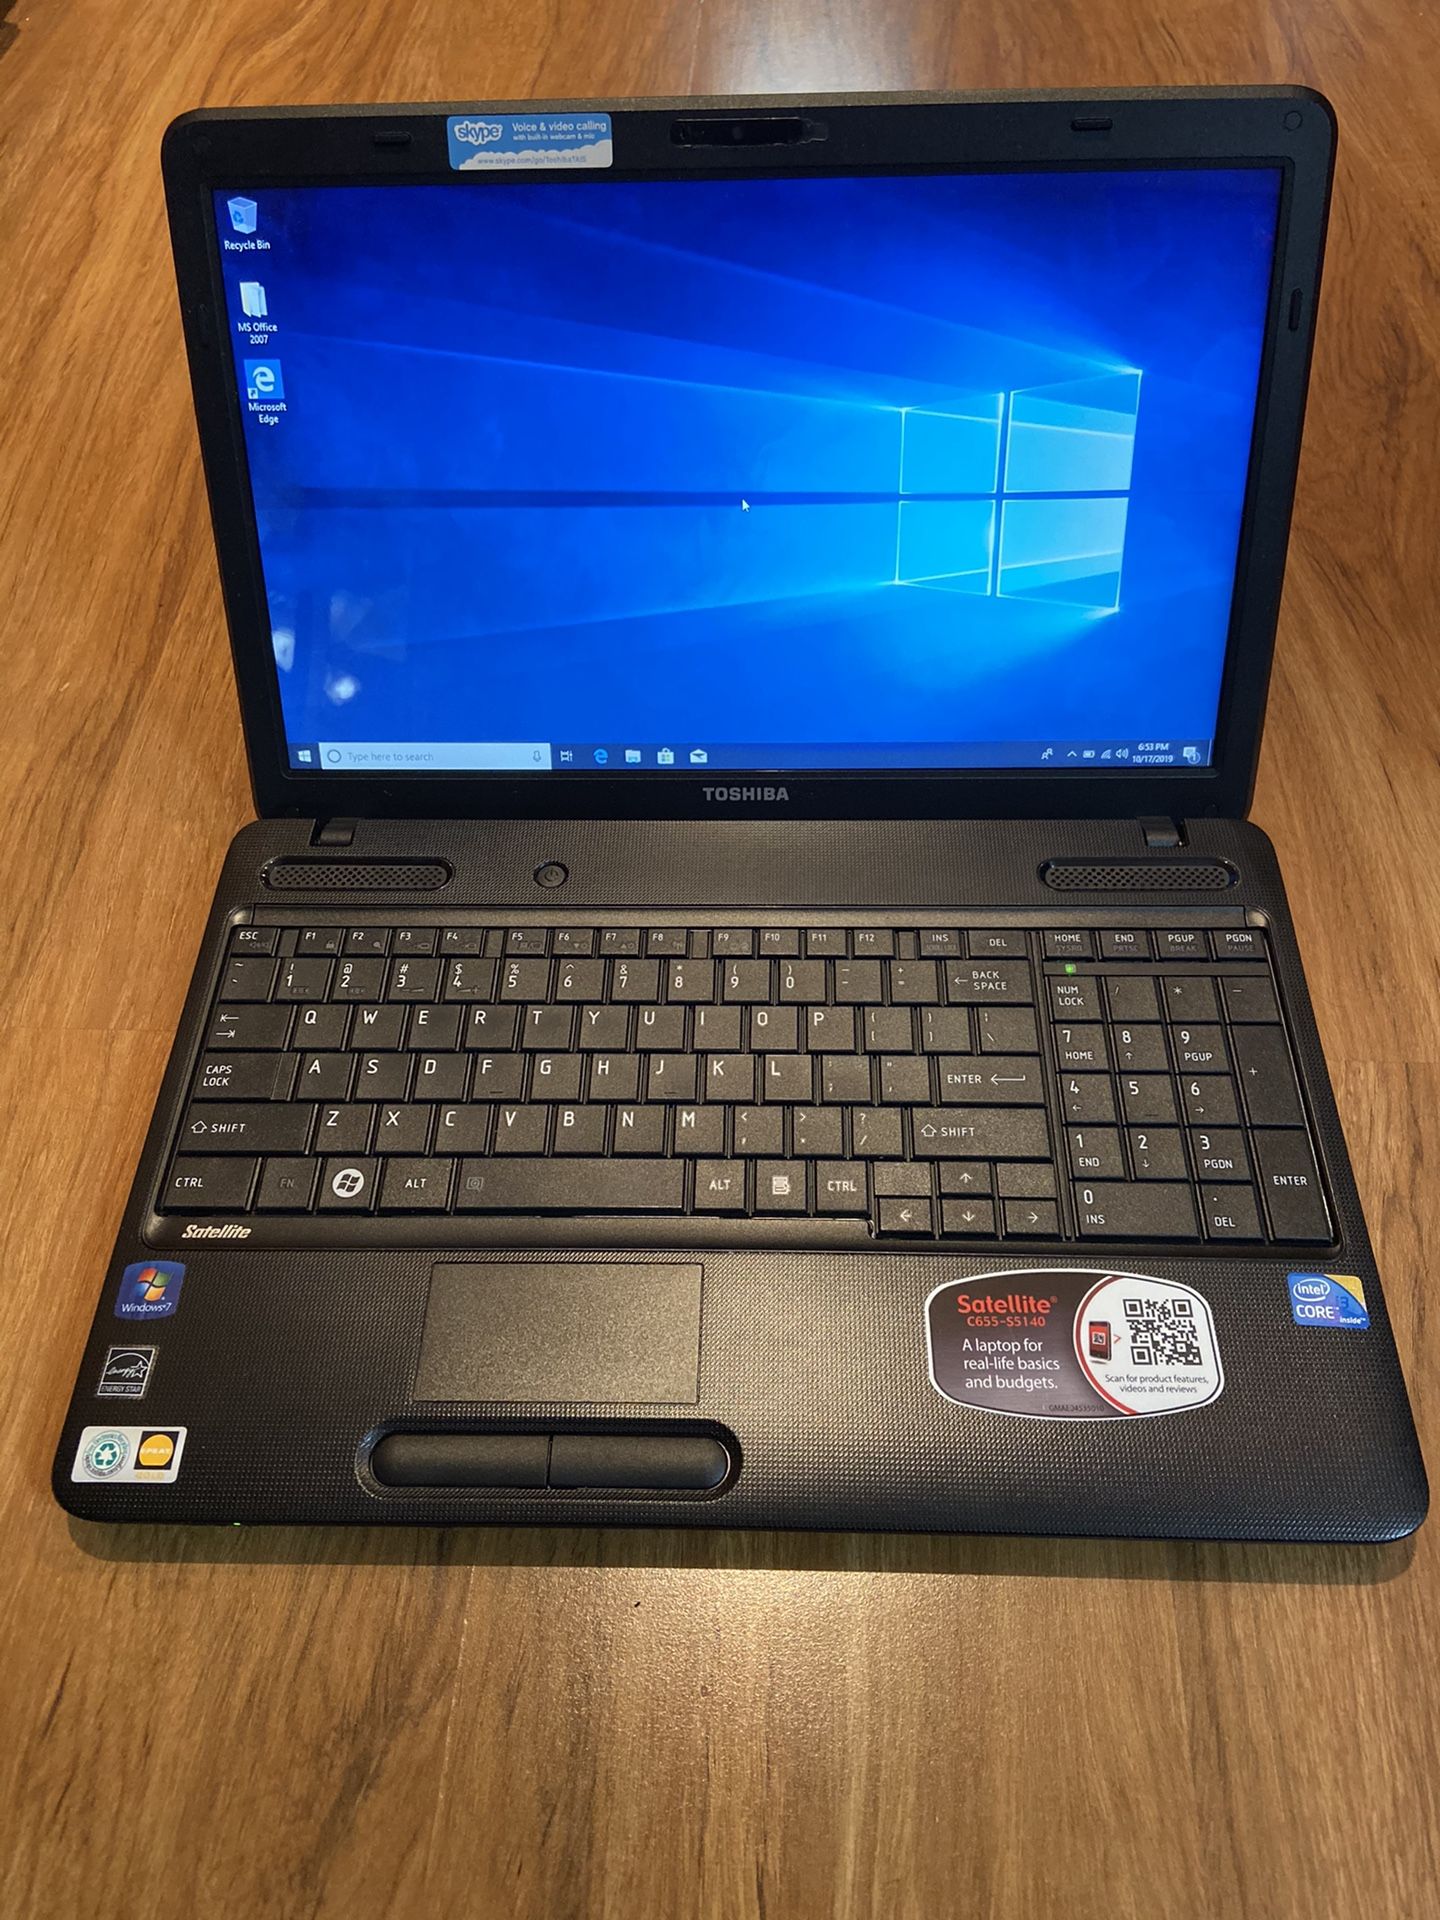 Toshiba Satellite A665 core i3 4GB Ram 160GB Hard Drive 15.6 inch HD Screen Windows 10 Pro Laptop with charger in Excellent Working condition!!!!!